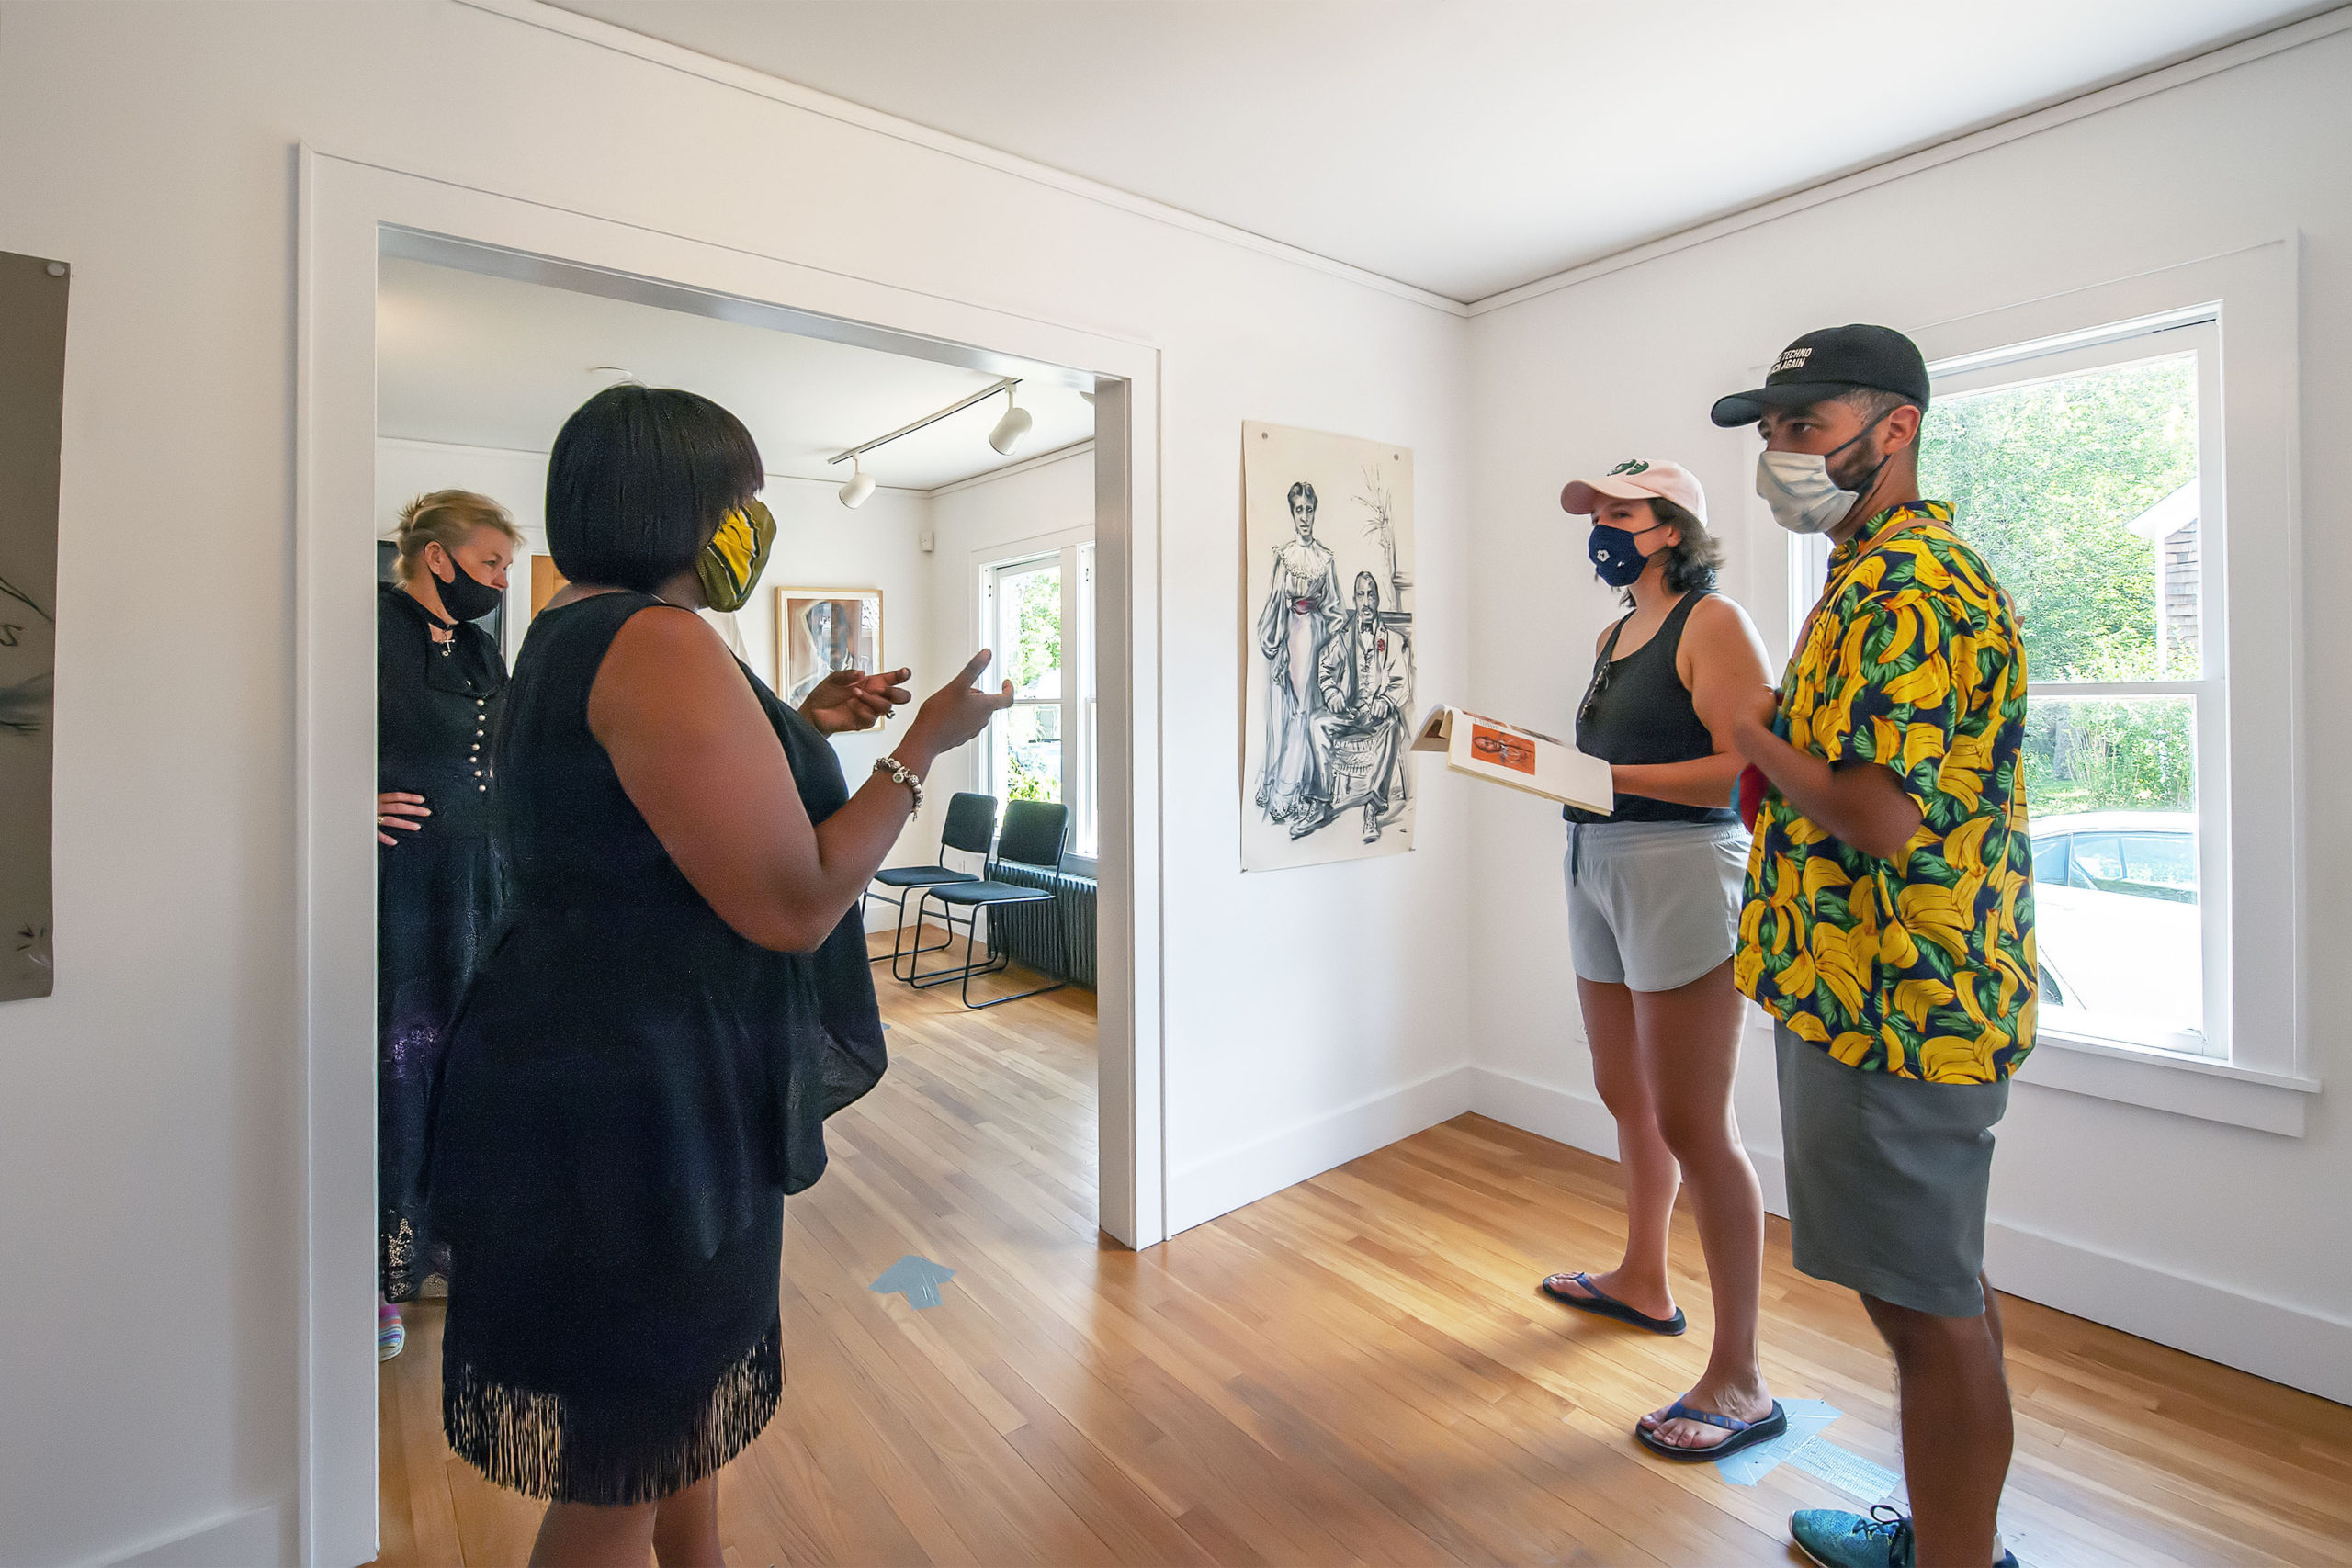 As artist Sabina Streeter looks on AS curator Dr. Georgette Grier of the Eastville Historical Society speaks about her artwork to visitors just prior to the opening of her exhibition at the Society's Heritage House on Saturday.   MICHAEL HELLER